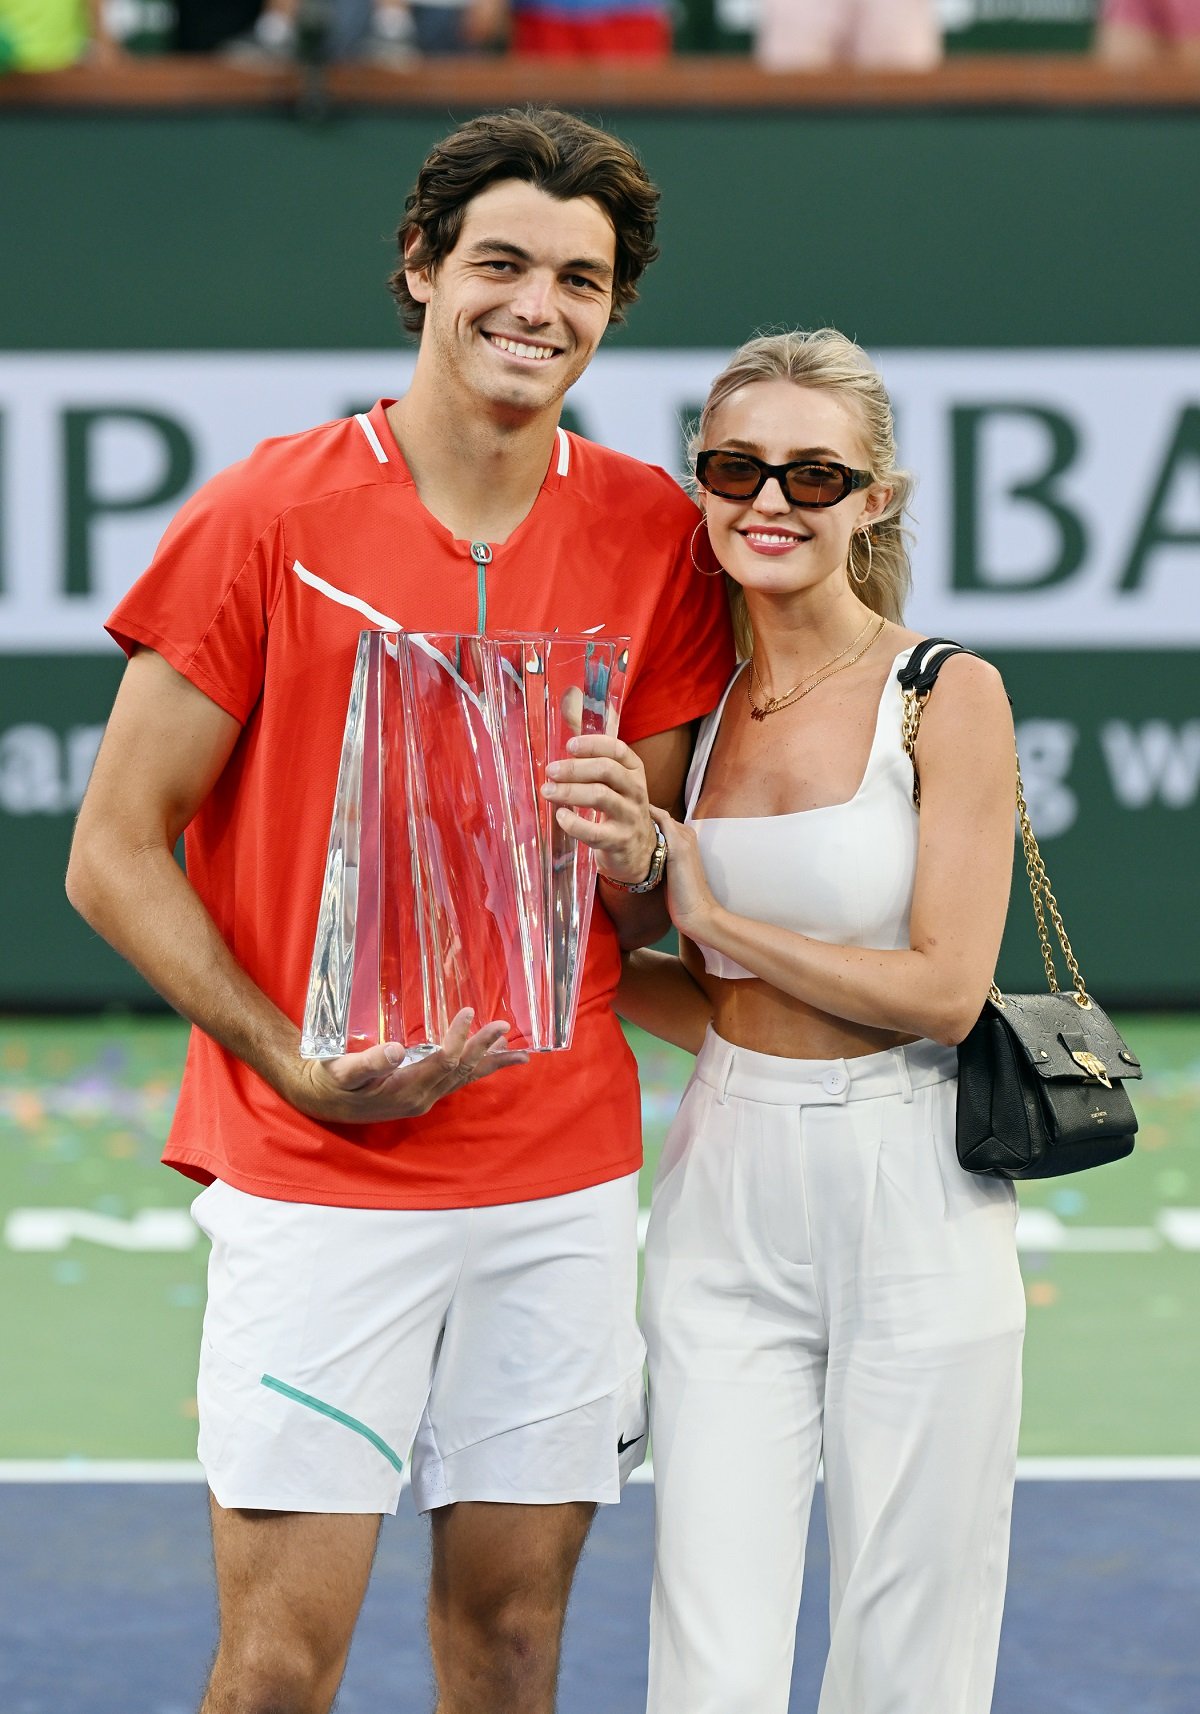 Taylor Fritz poses on the court with friend Morgan Riddle after winning the final tennis match at the BNP Paribas Open.